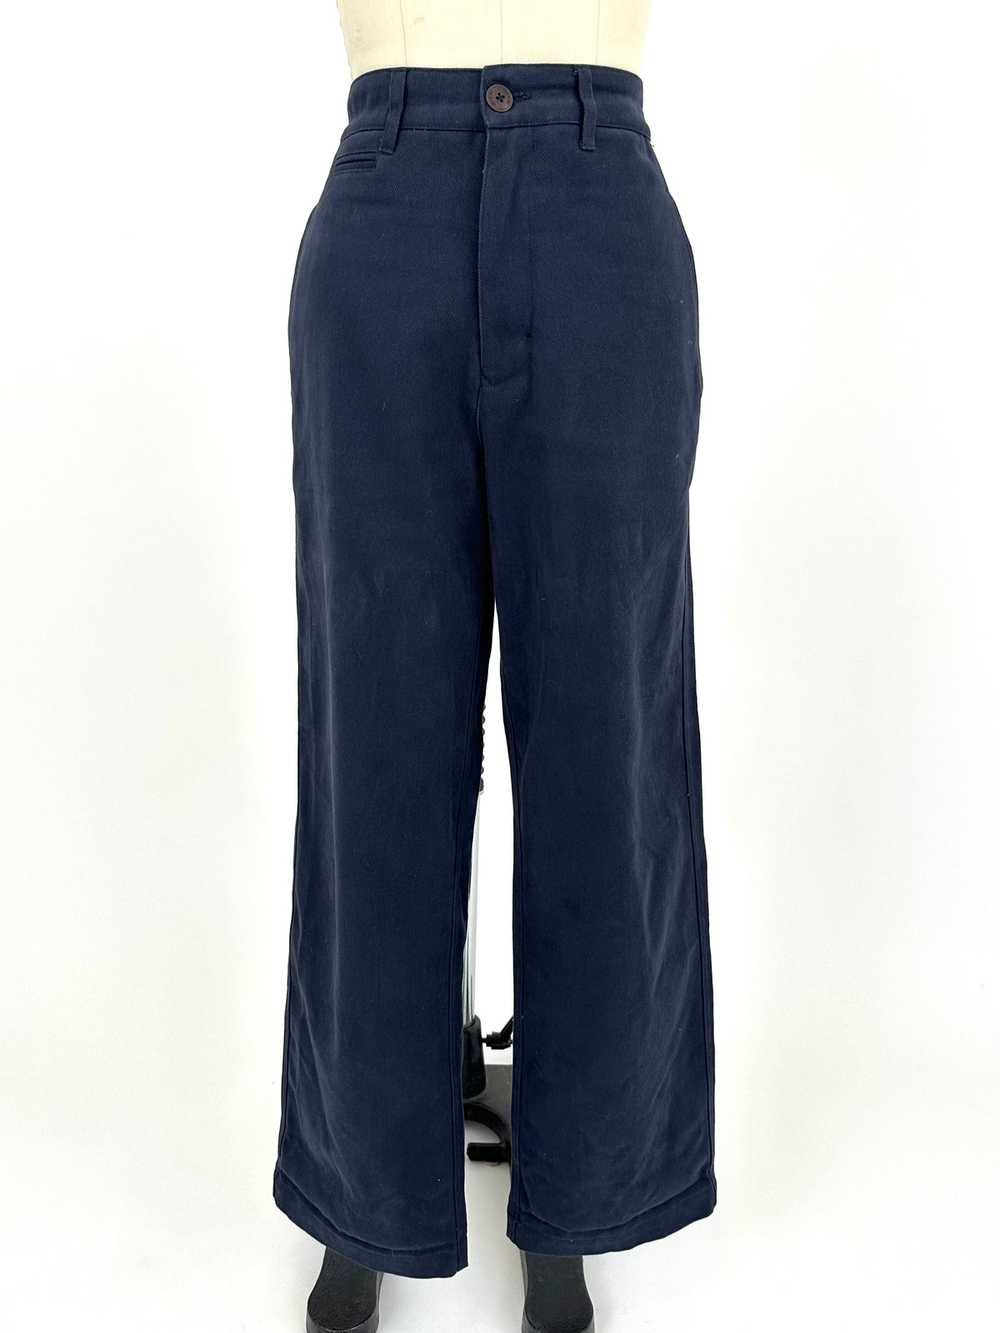 Girls of Dust Brushed Twill Trousers - image 4